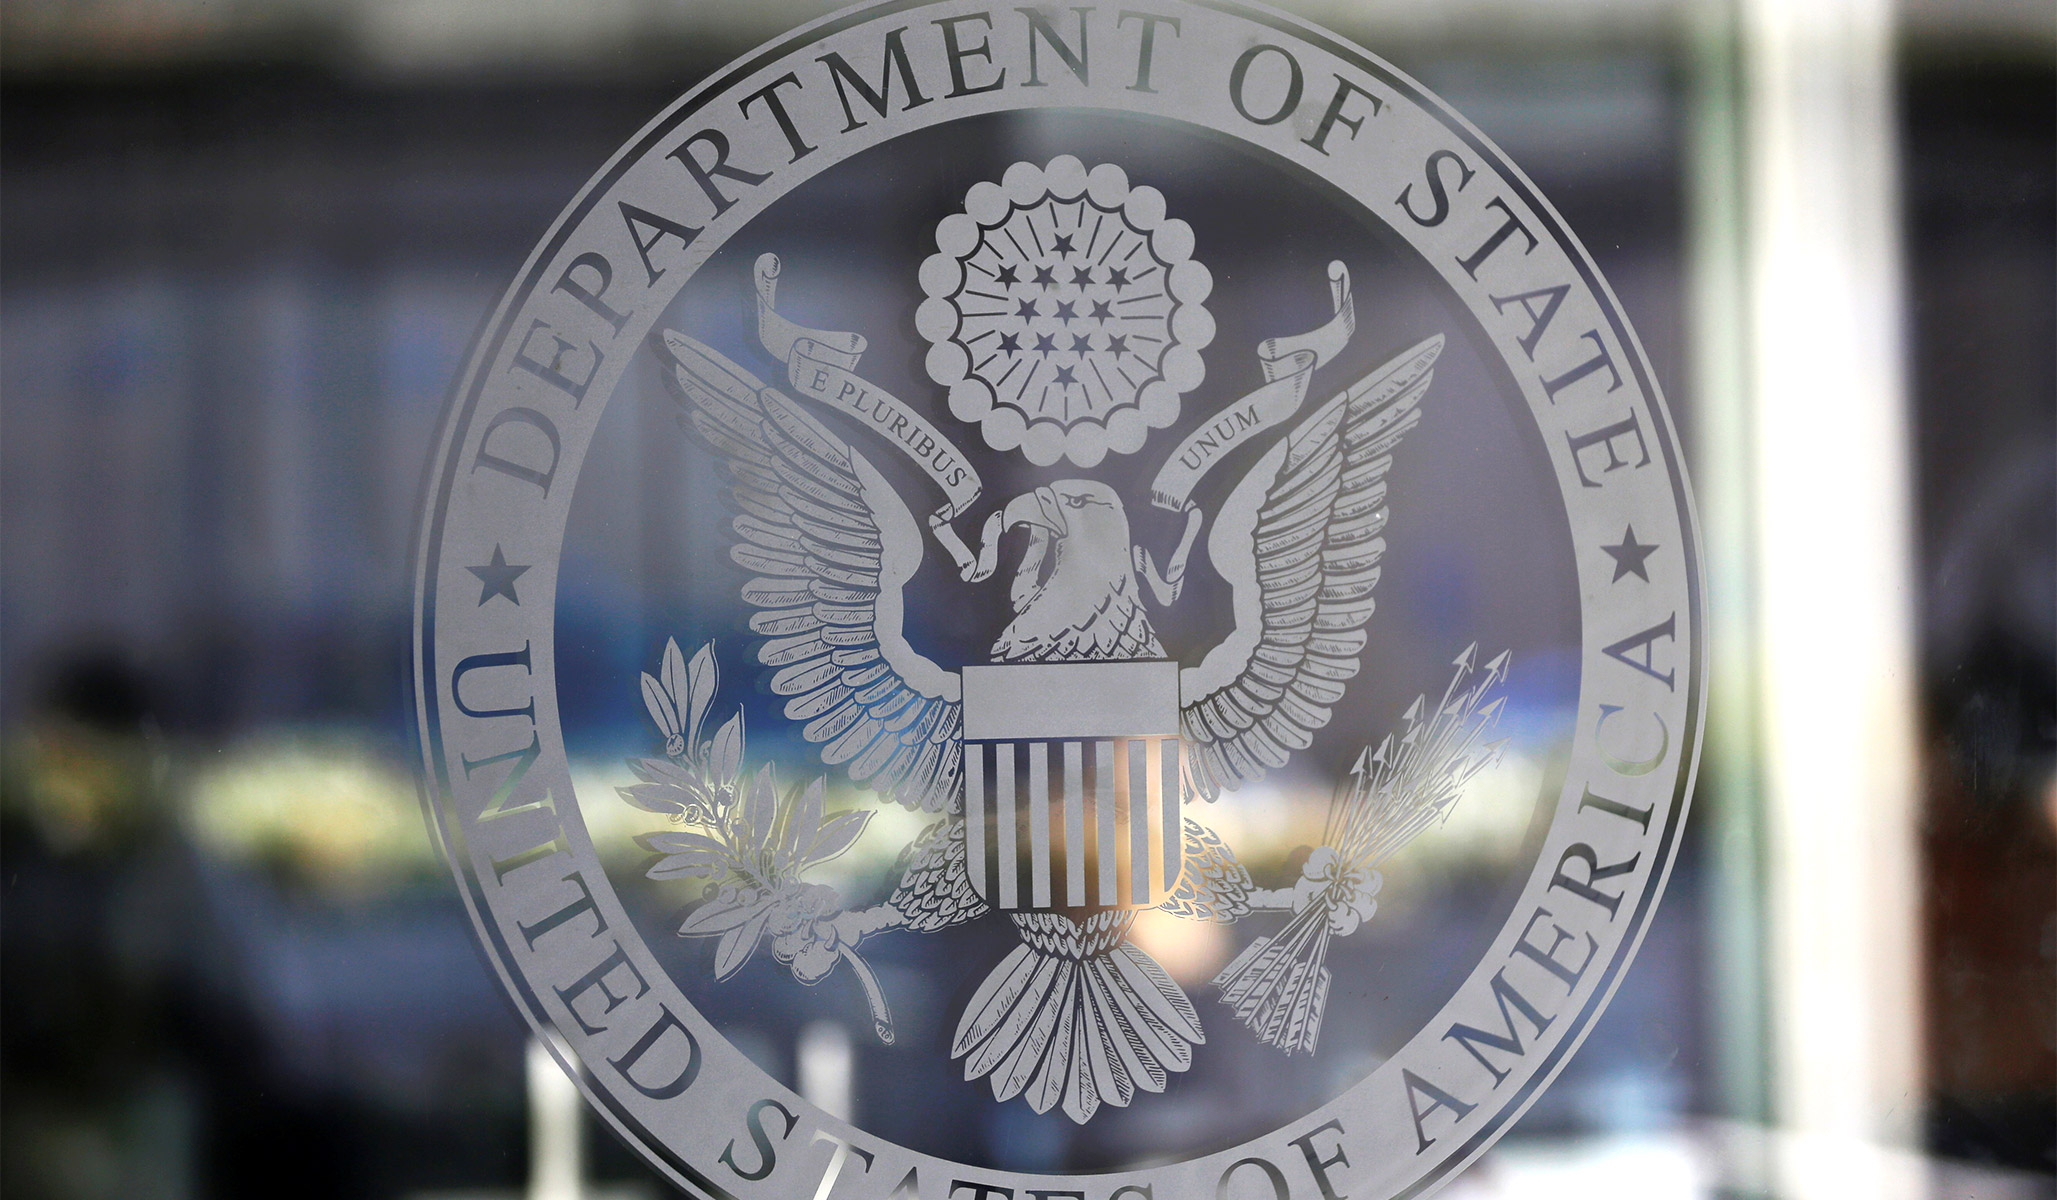 State Department Adds Email Pronouns for All Employees, Mislabeling Officials’ Genders